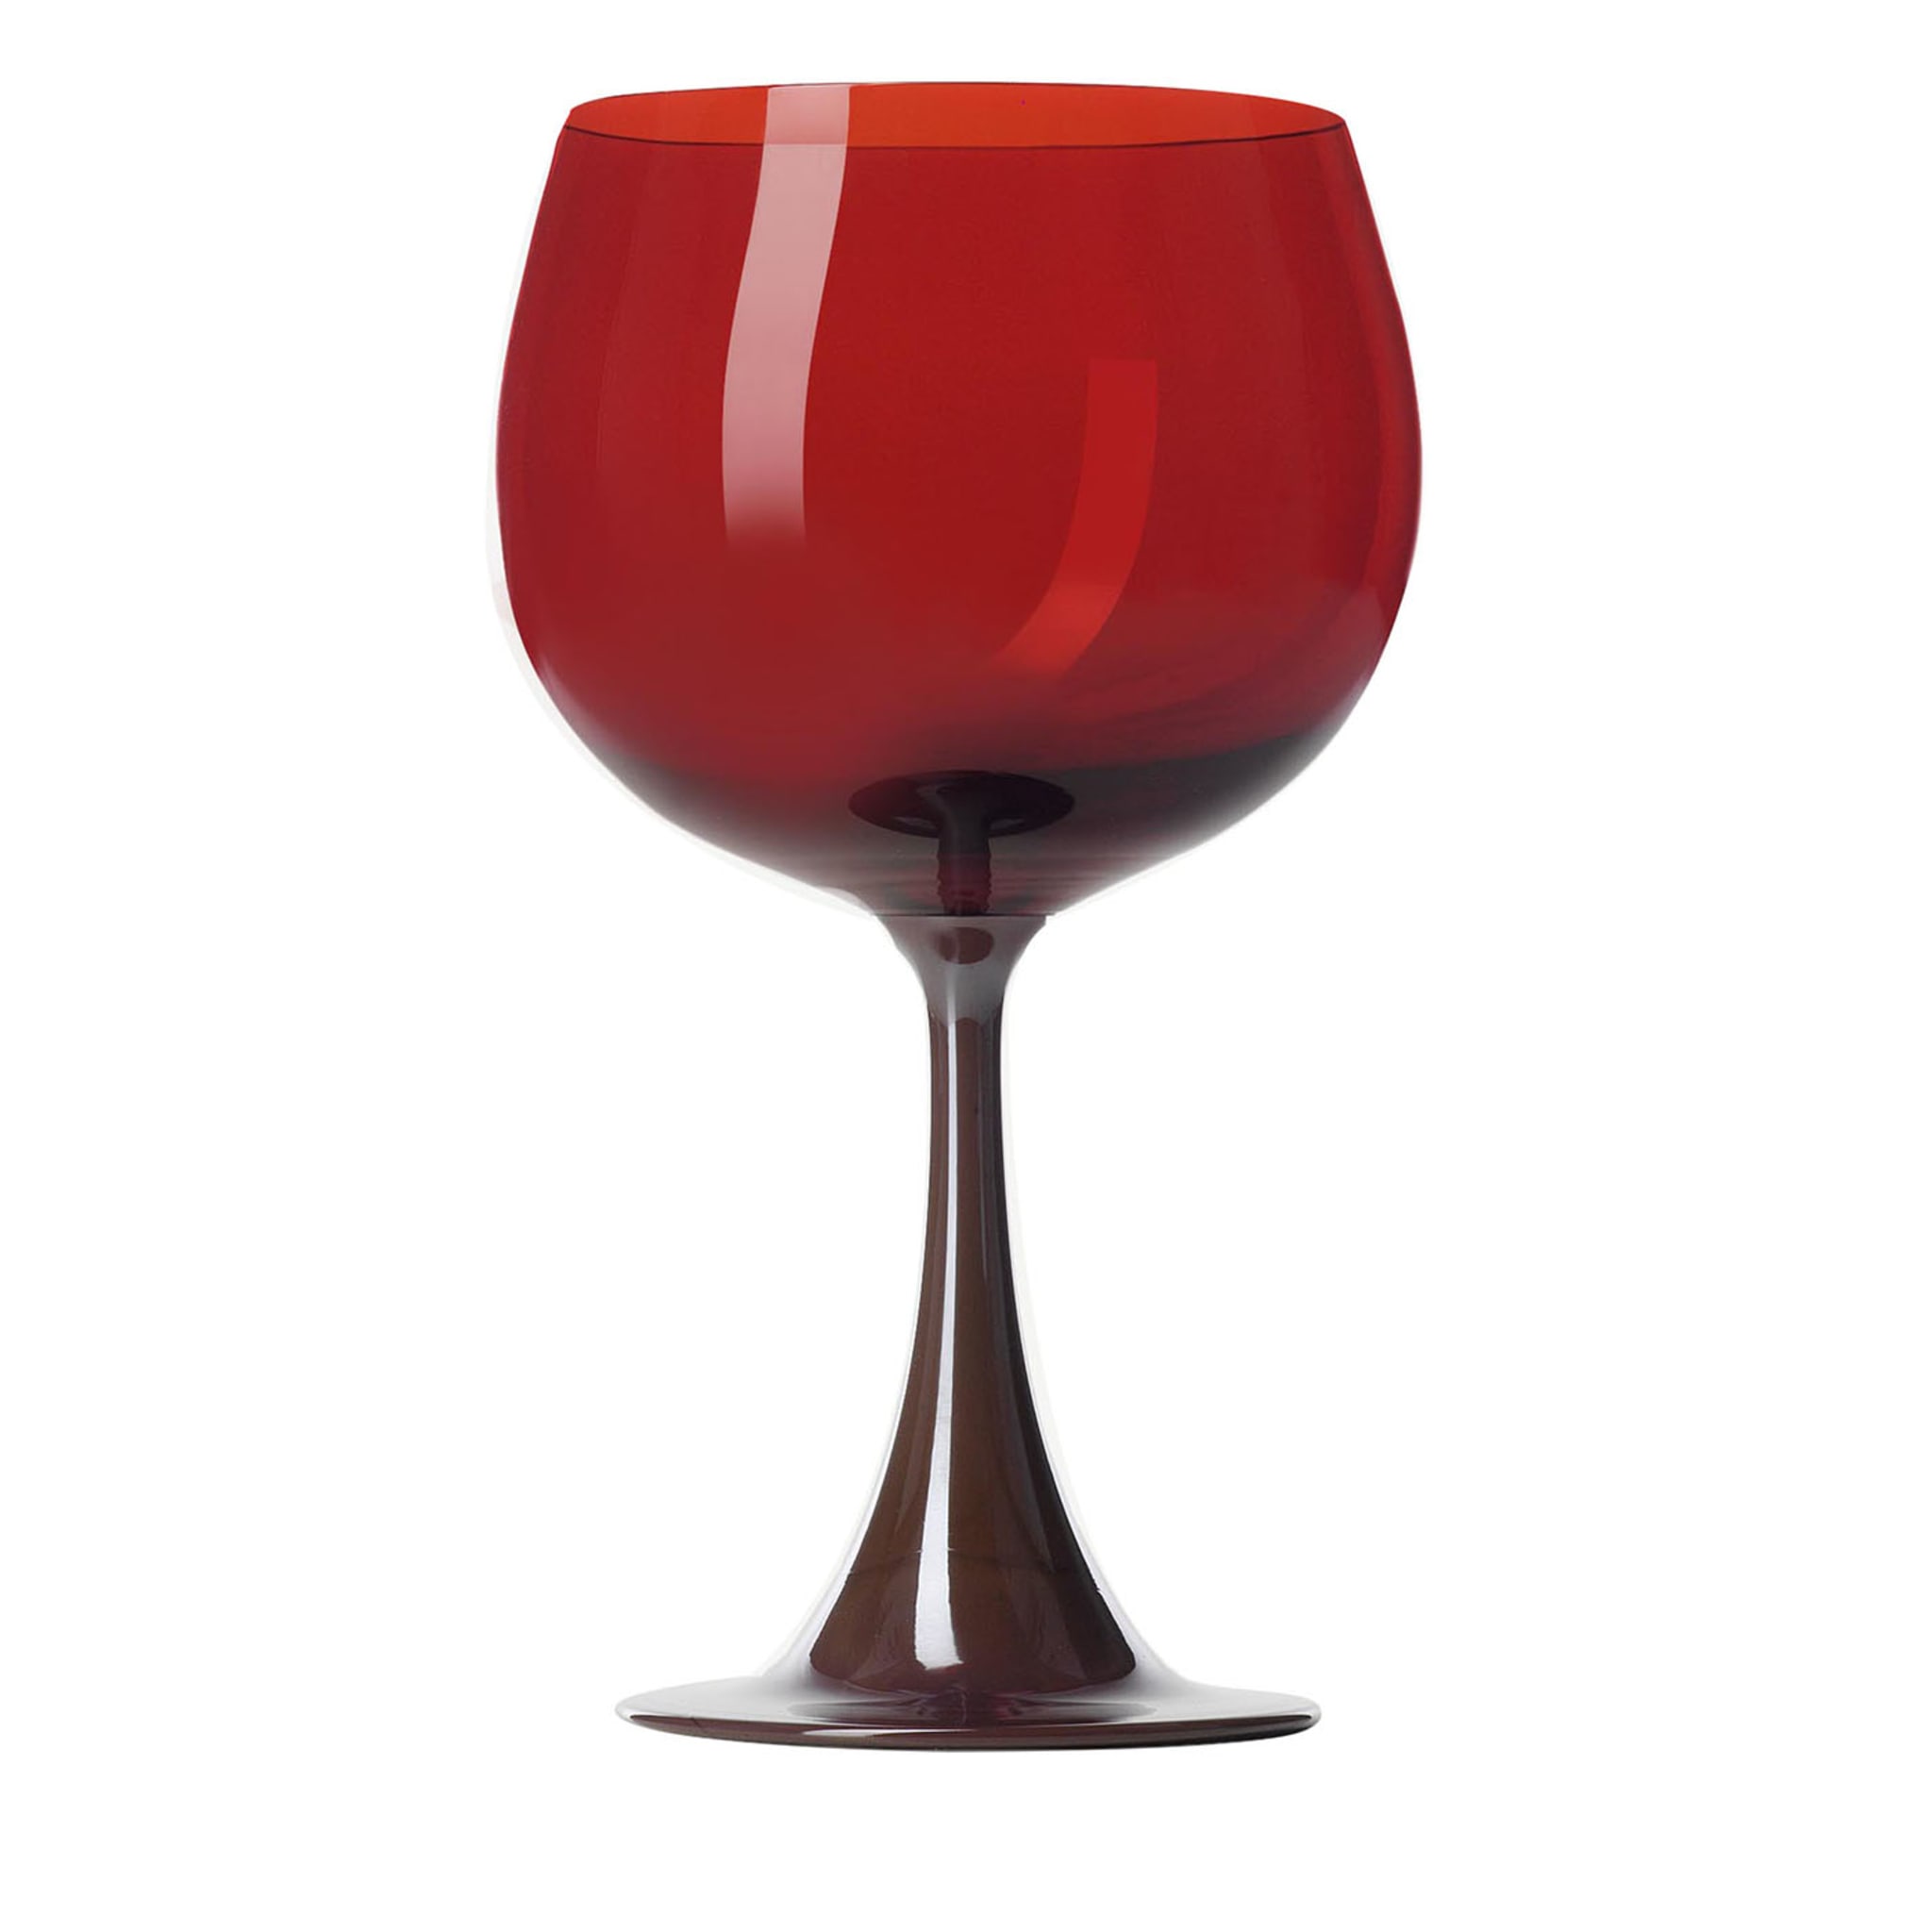 Burlesque Red & Blueberry Stem Glass by Stefano Marcato - Main view